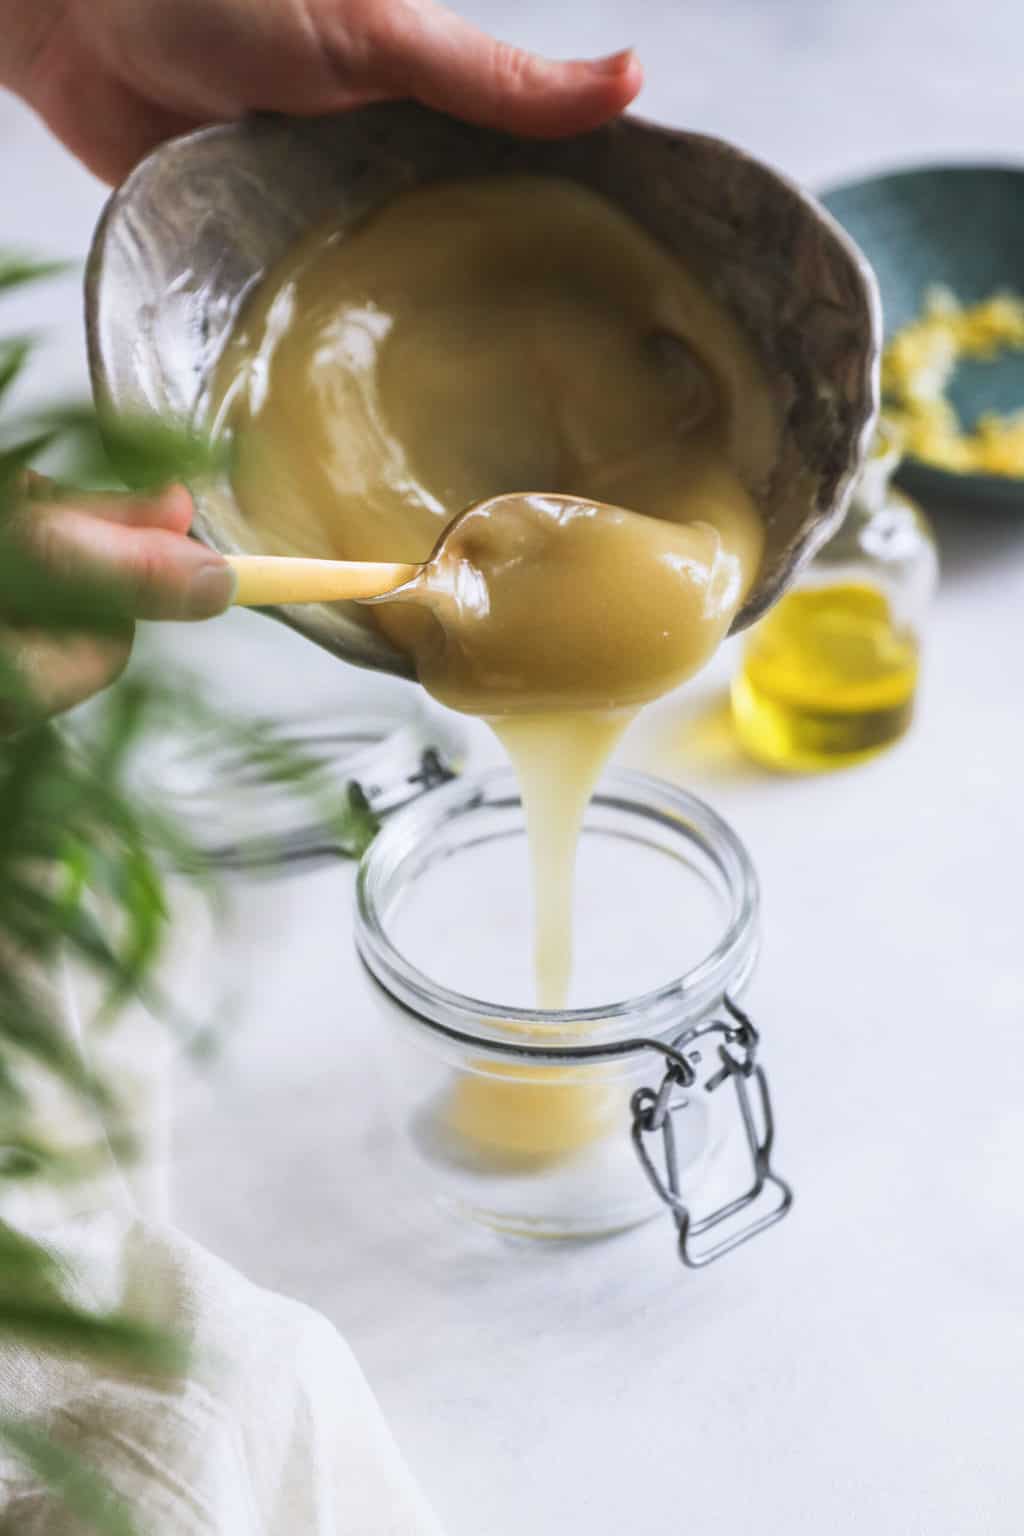 Pour balm into a container and let it harden before using